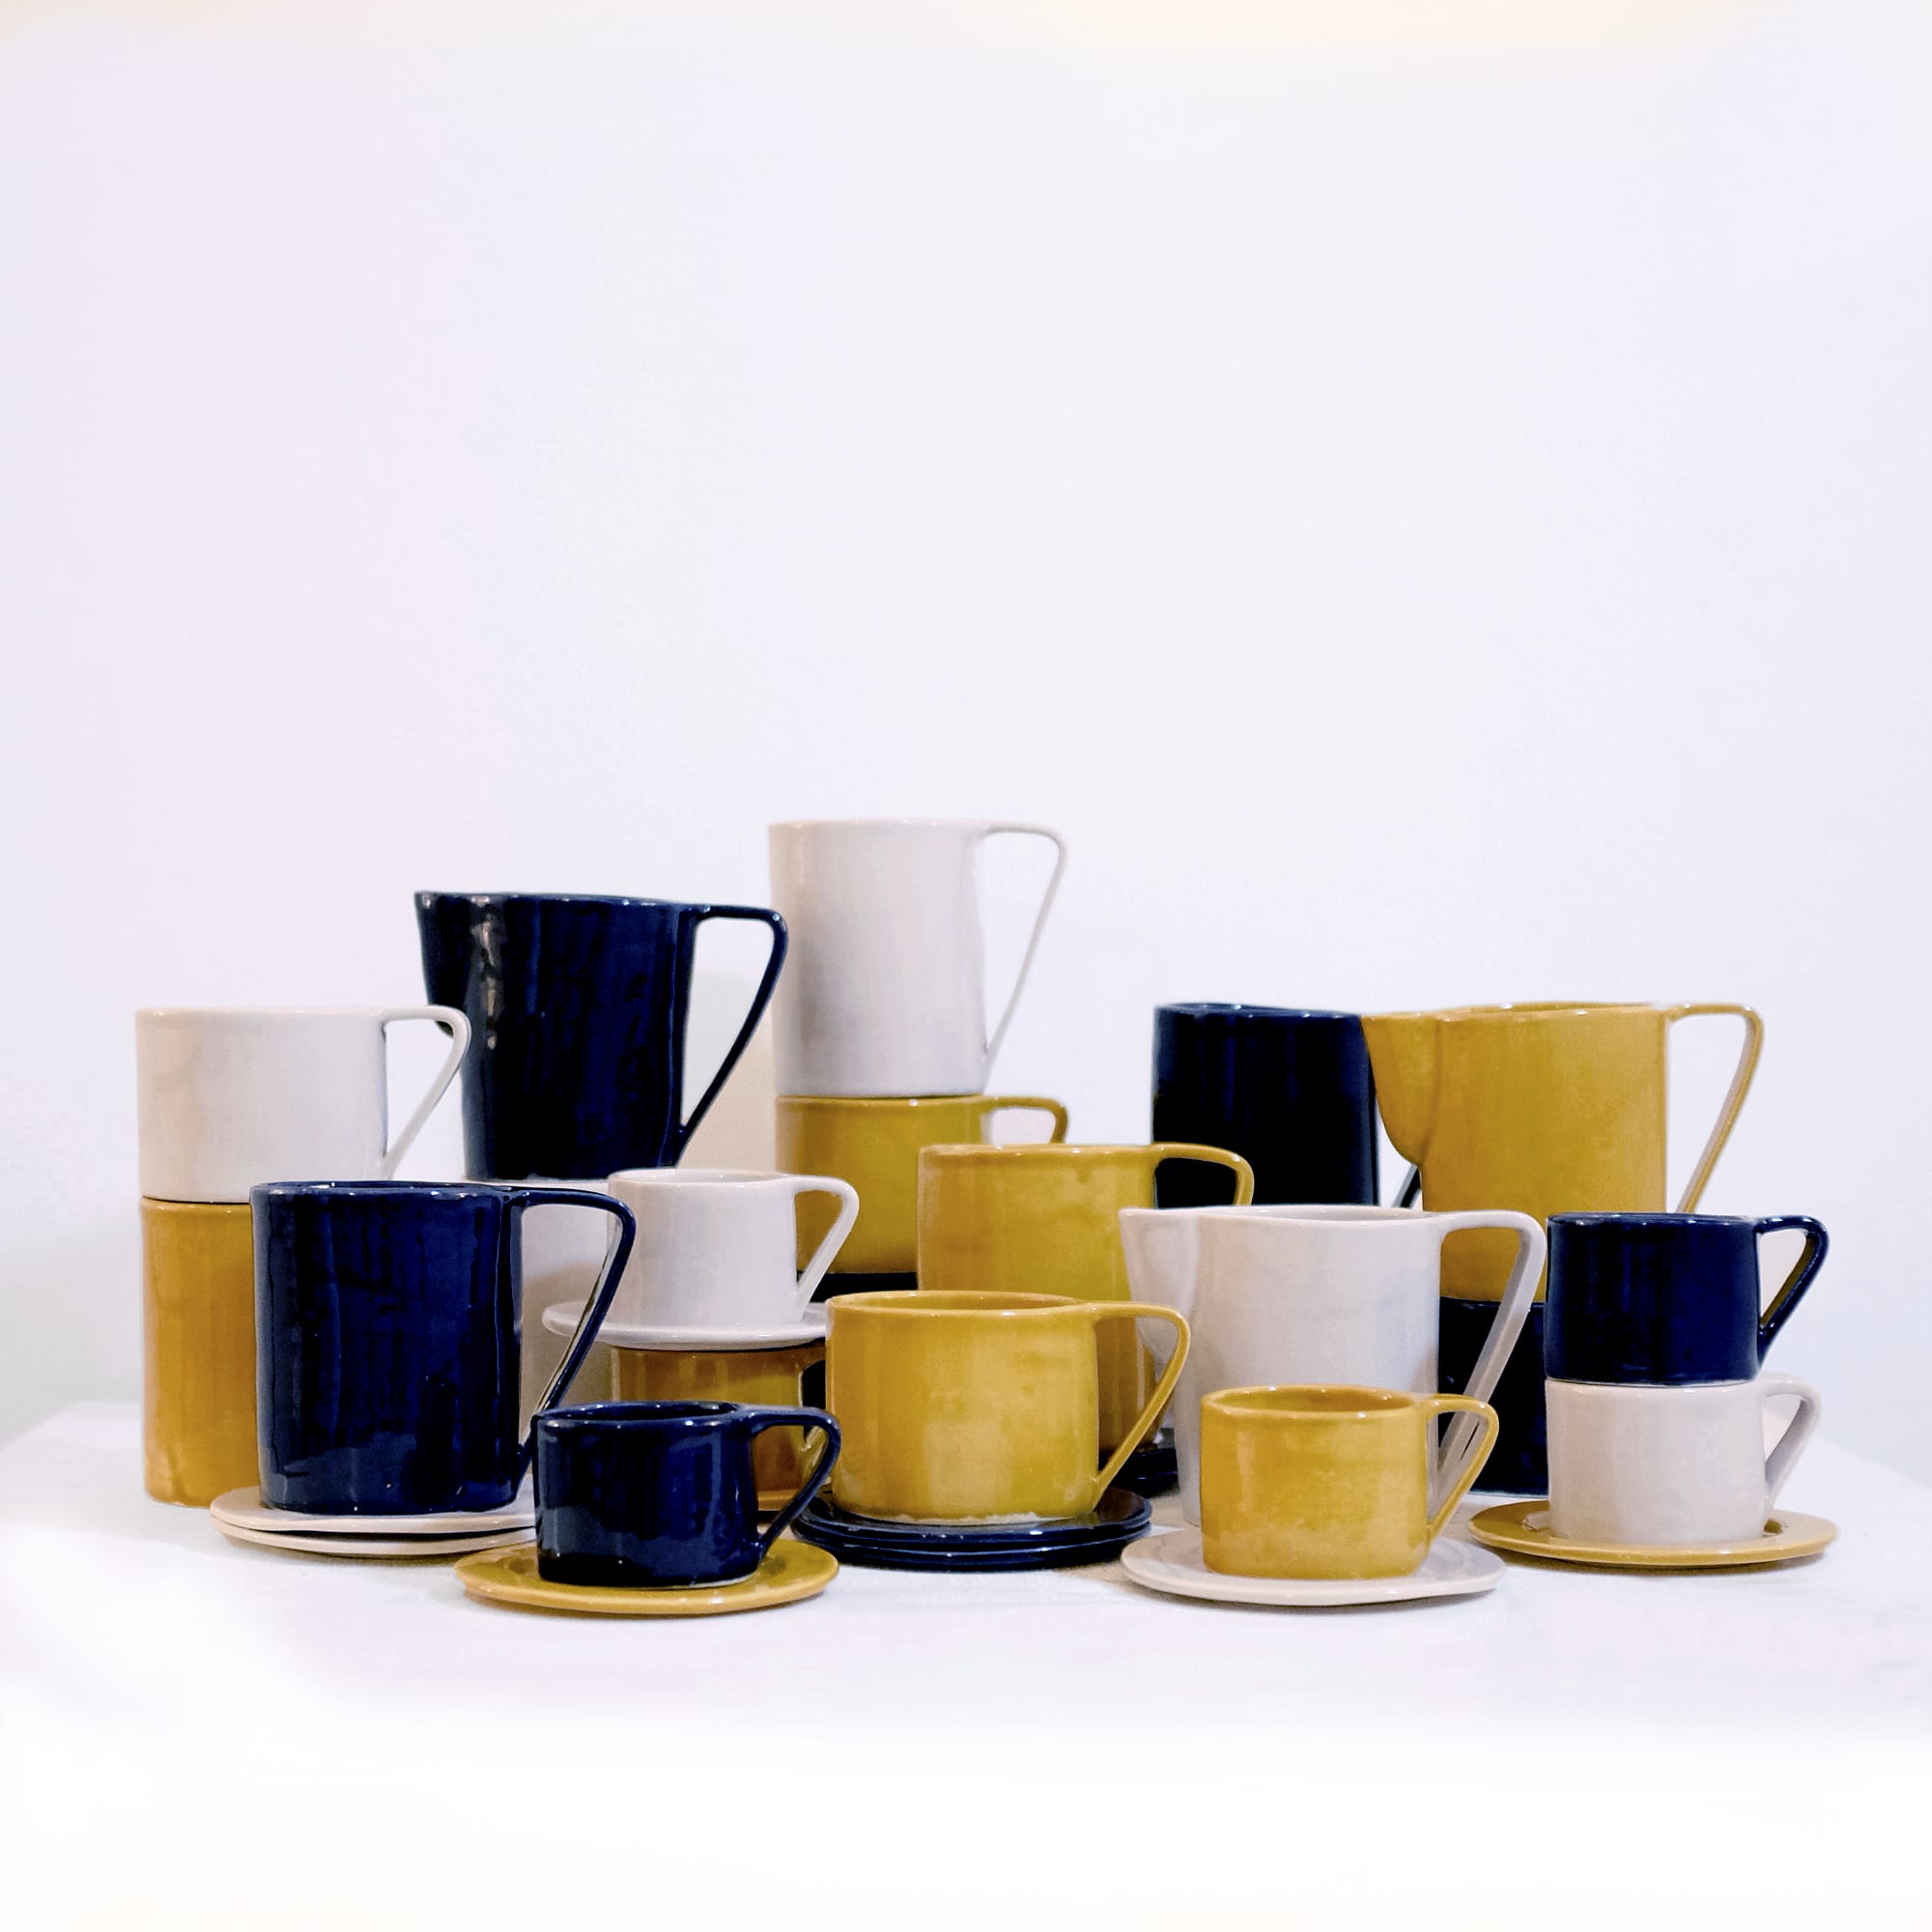 Milano Nebbia Set of 4 Espresso cups and saucers - Marta Benet